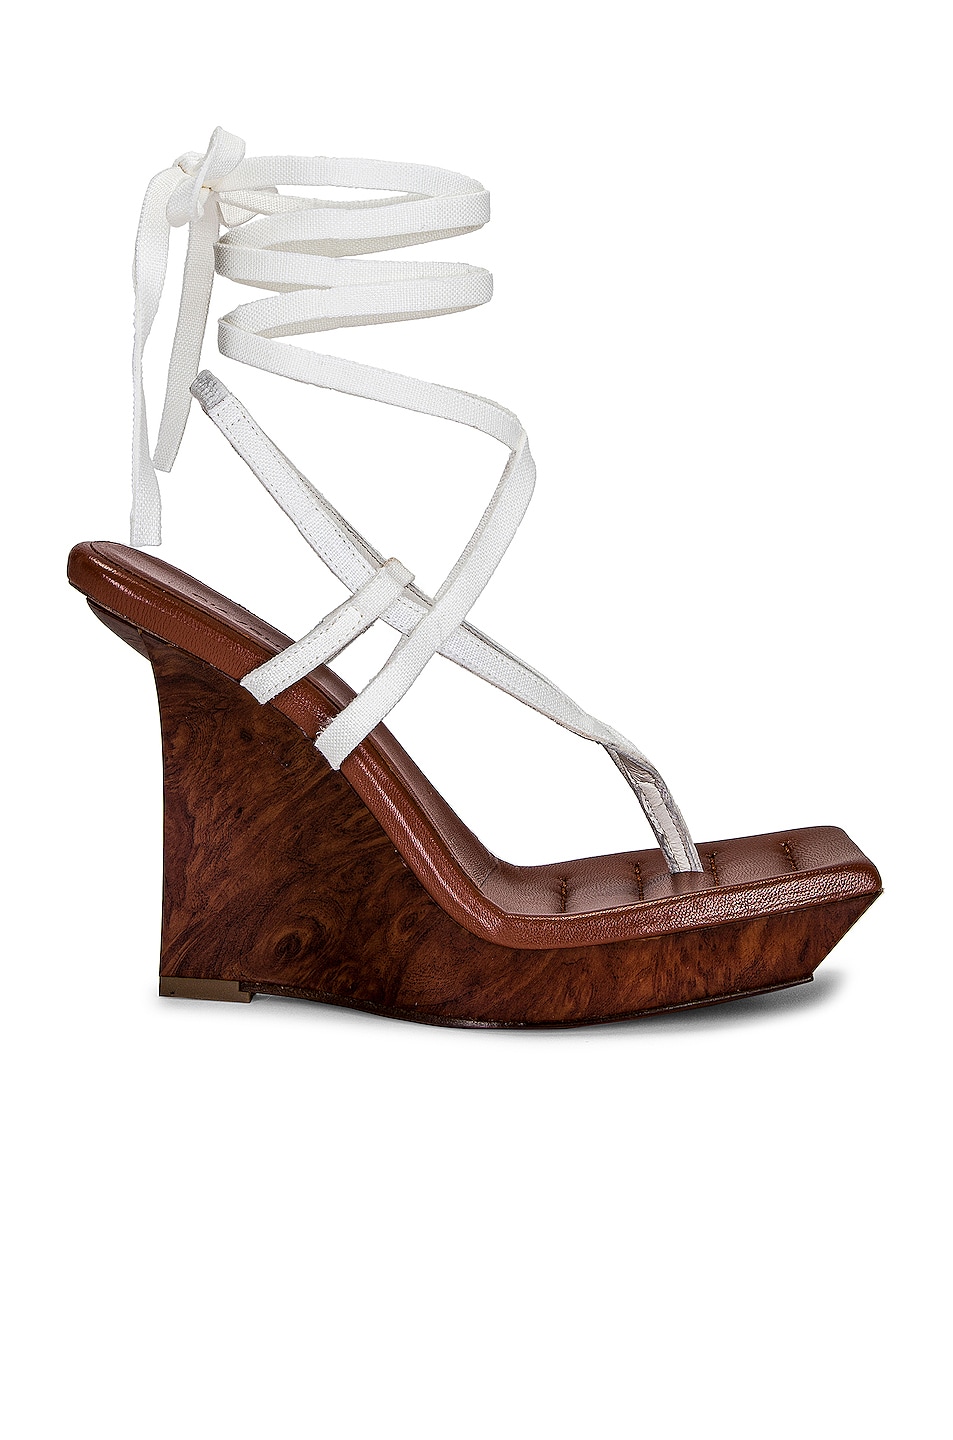 Image 1 of GIA BORGHINI x RHW Lace Up Wedge Sandal in Off White